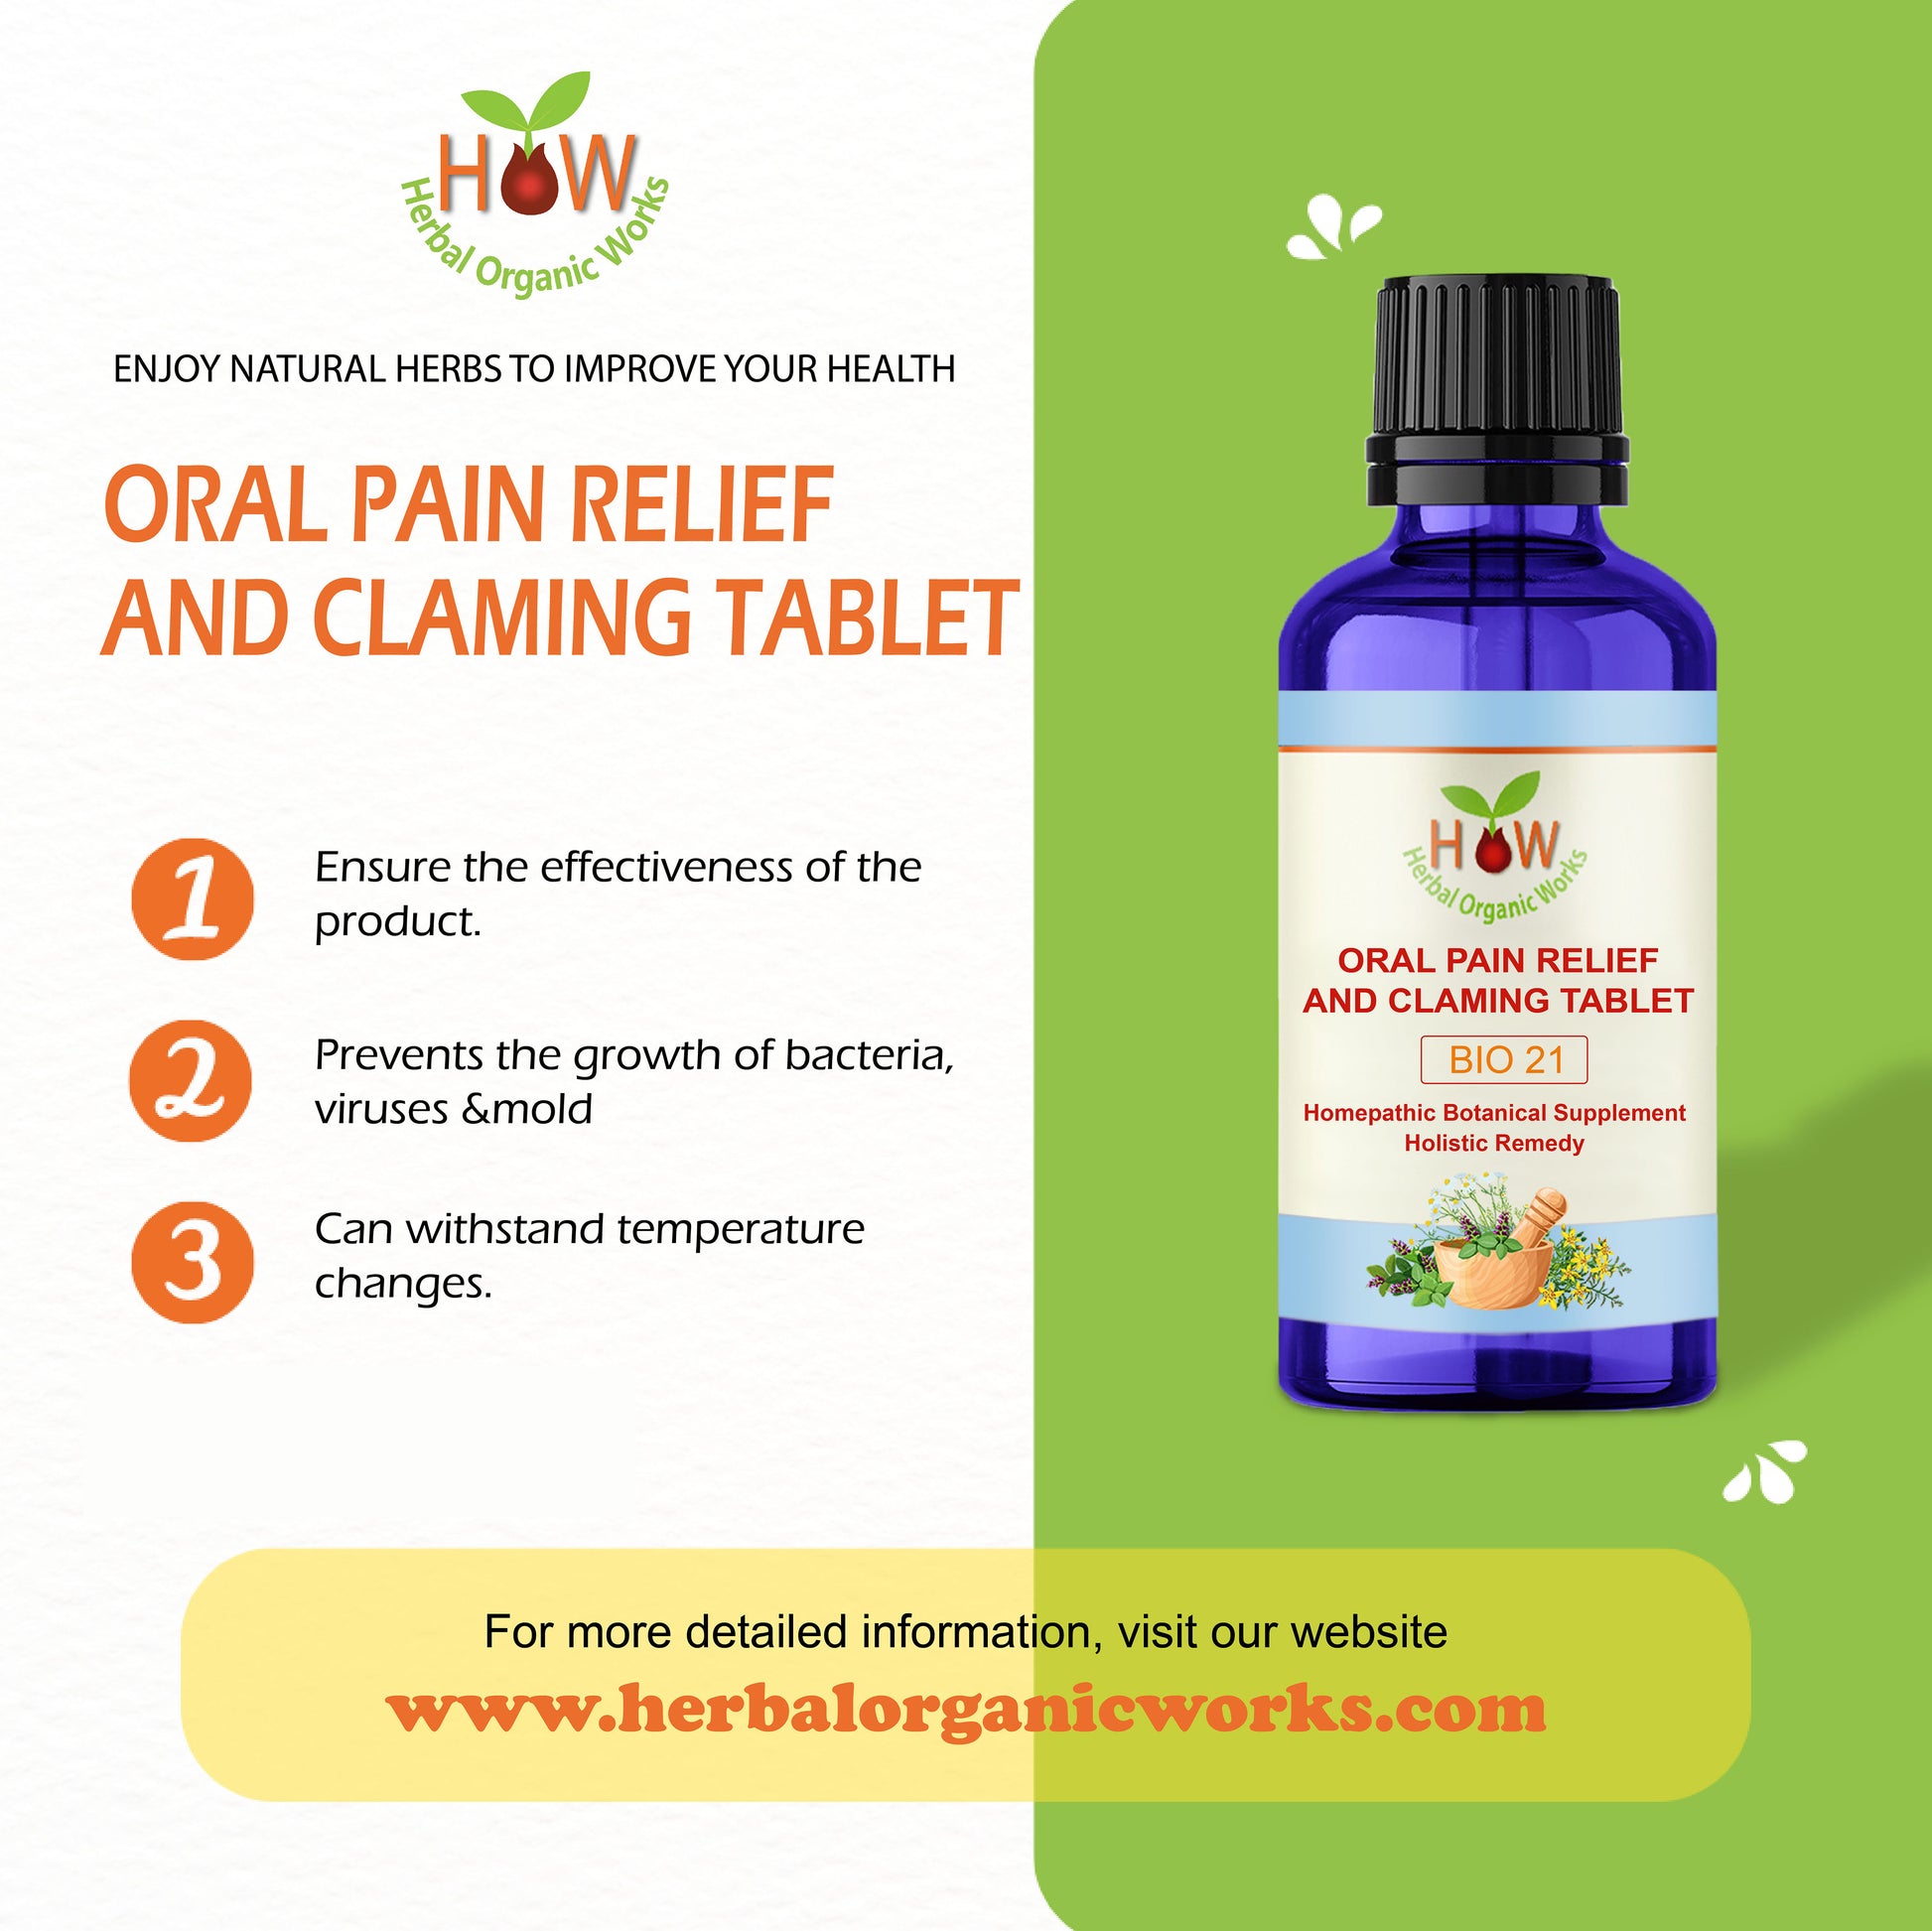 ORAL PAIN RELIEF AND CALMING TABLET (BIO21)